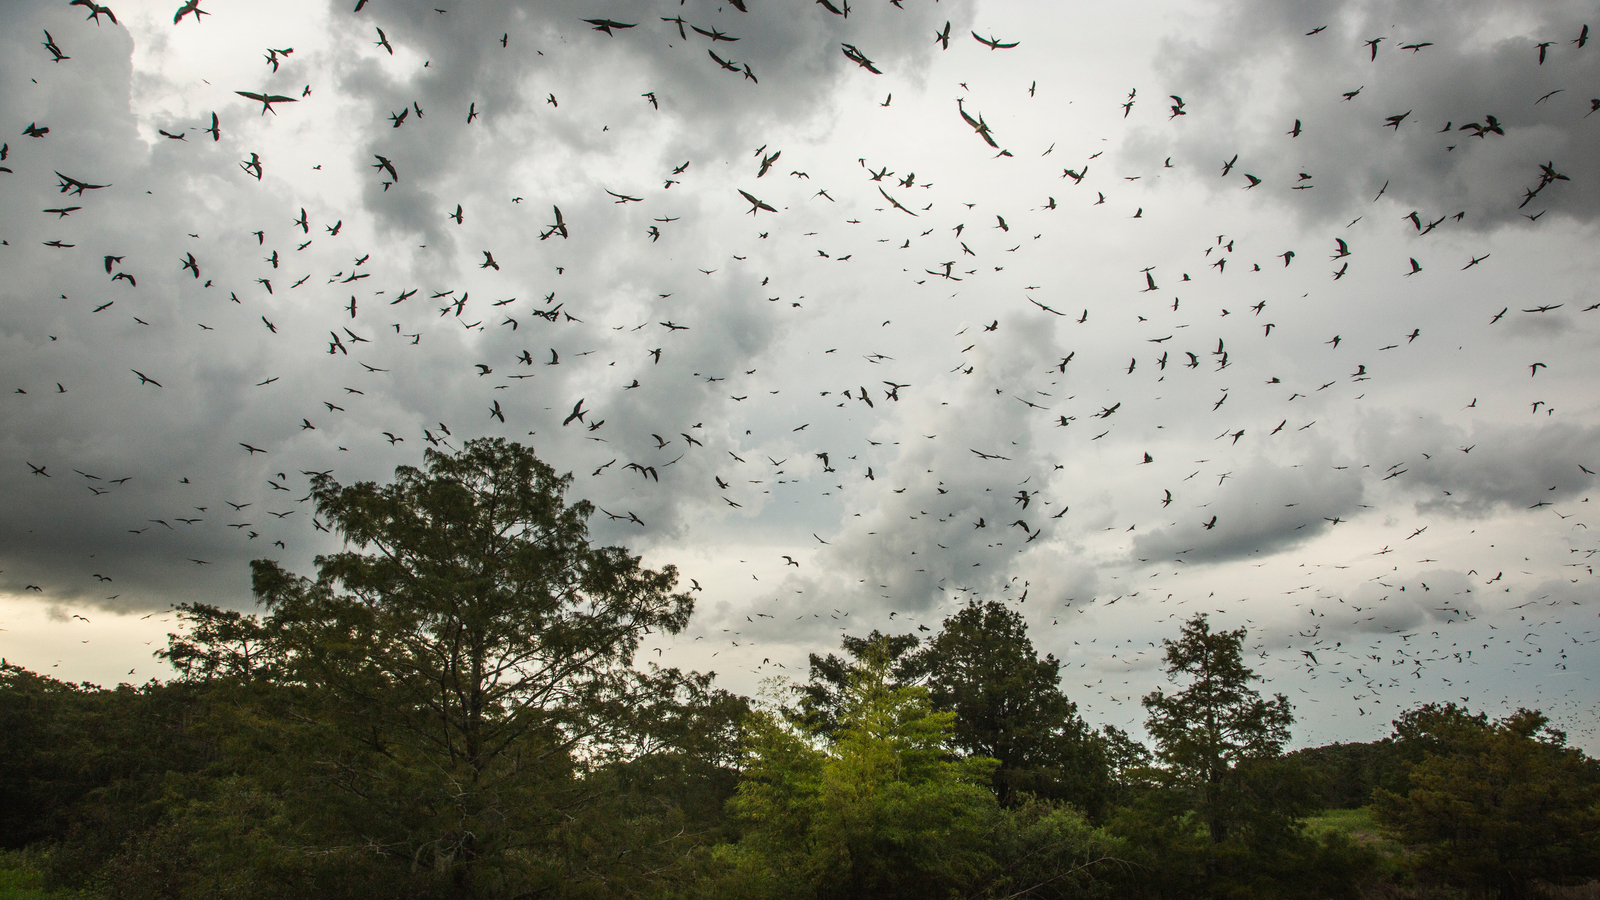 Swallow-tailed kites gather near Palmdale, FL, before migrating to Central and South America. Photo © Mac Stone 